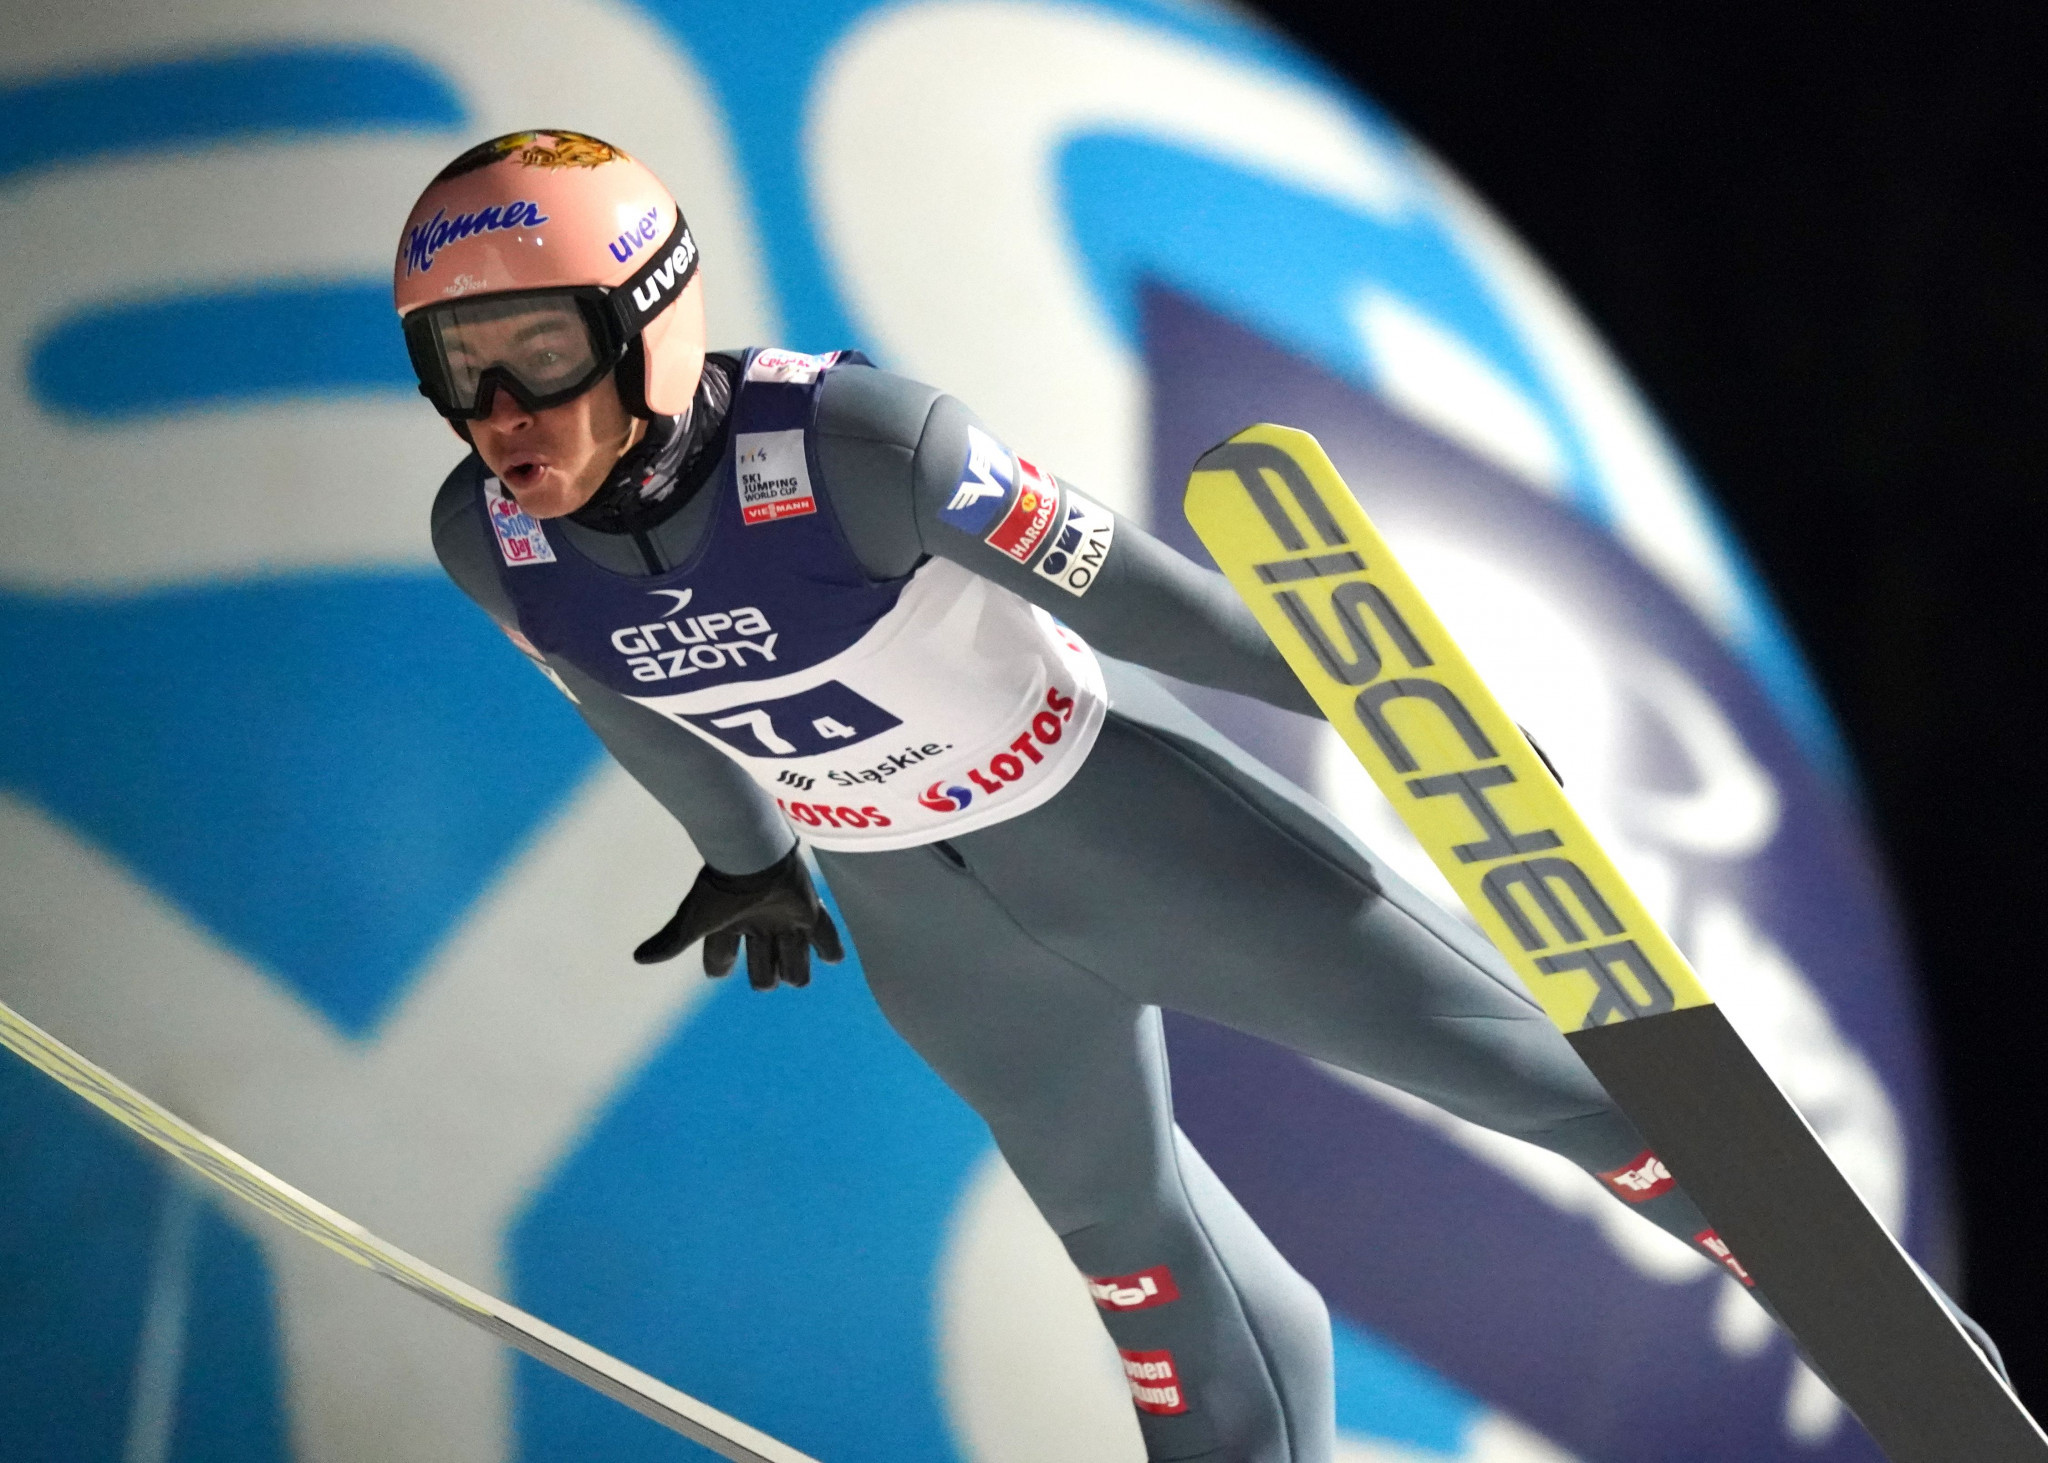 Austria's Stefan Kraft stormed to victory today at the FIS Men's Ski Jumping World Cup in Nizhny Tagil ©Getty Images